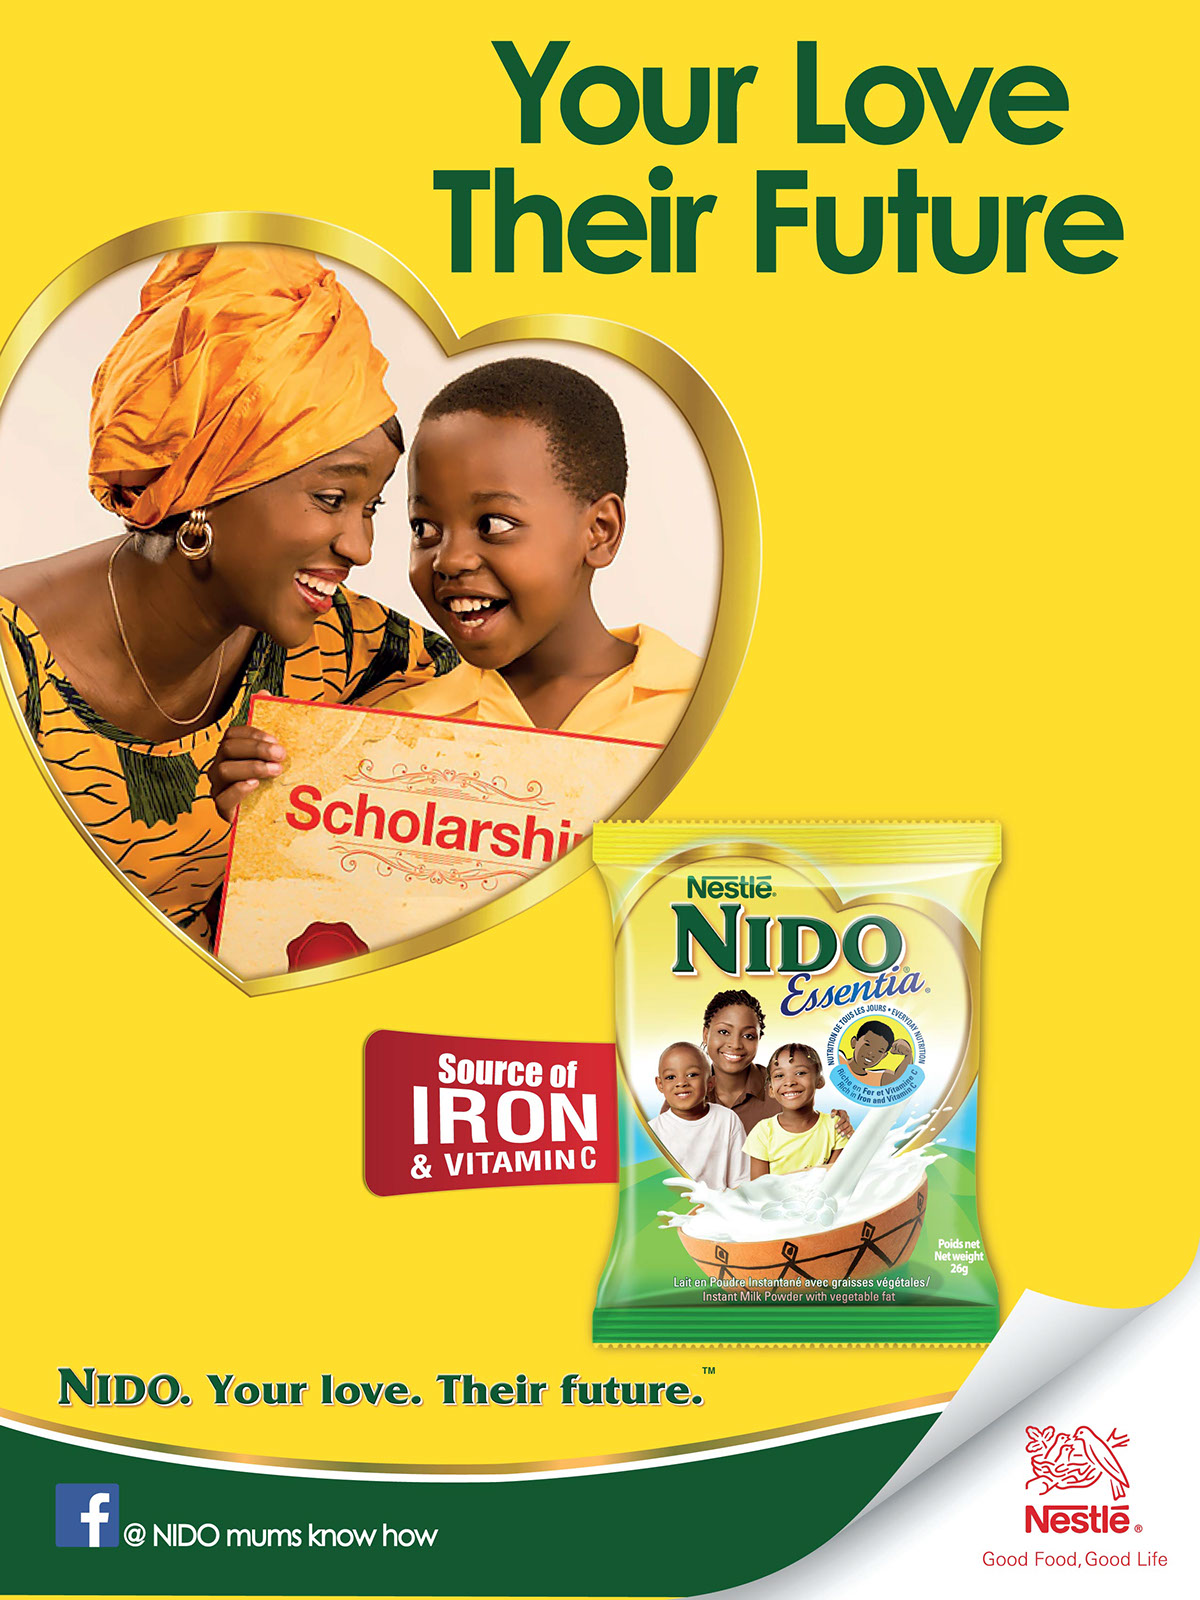 Nido West Africa nestle PUBLICIS AFRICA GROUP